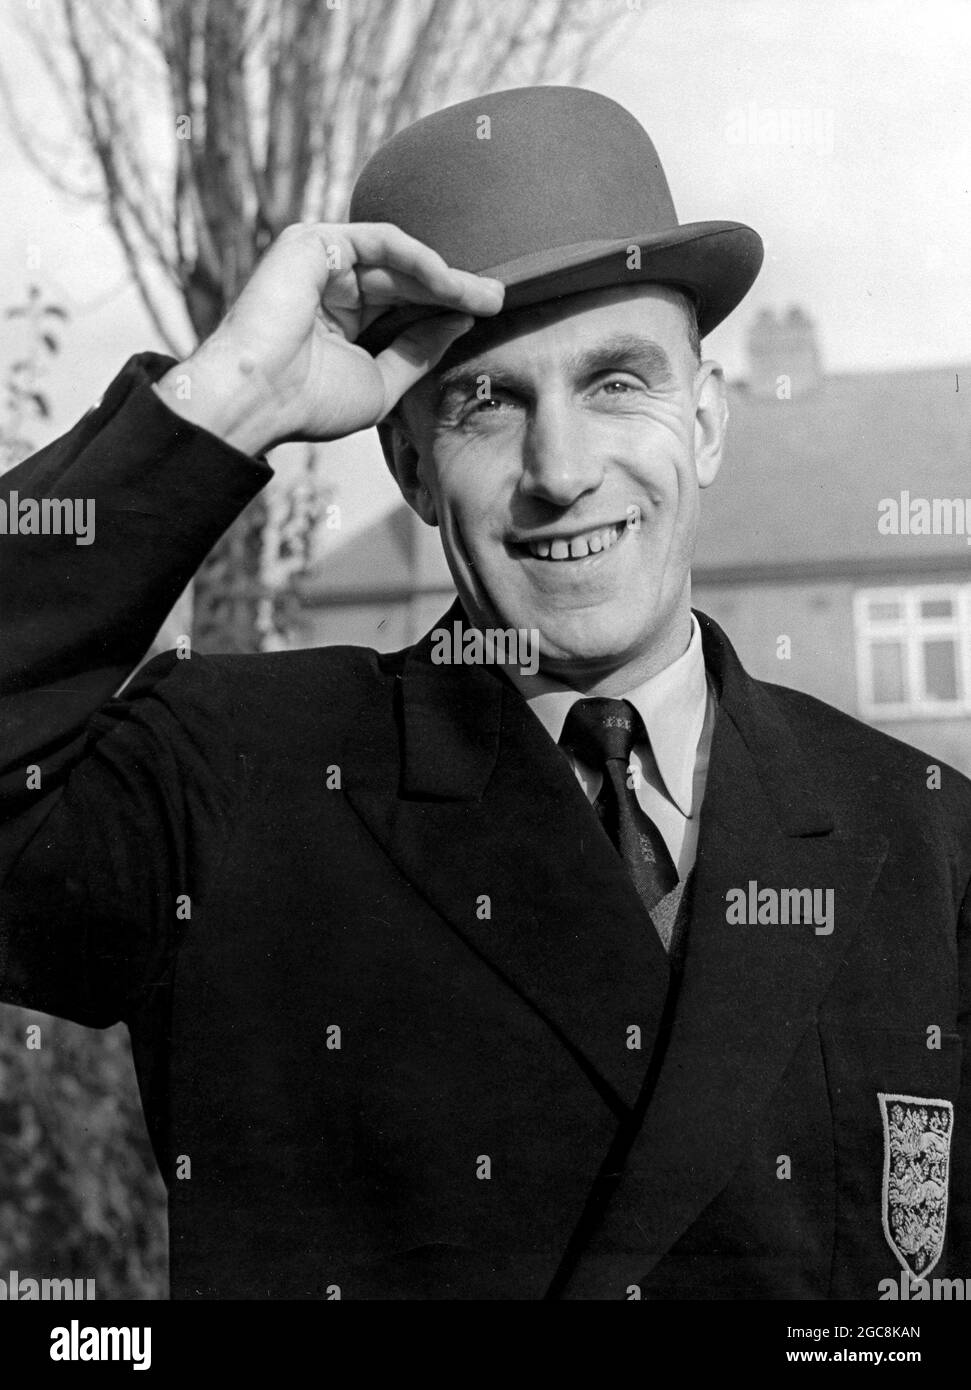 Wolves captain Billy Wright with bowler hat as he prepares for life after football Stock Photo